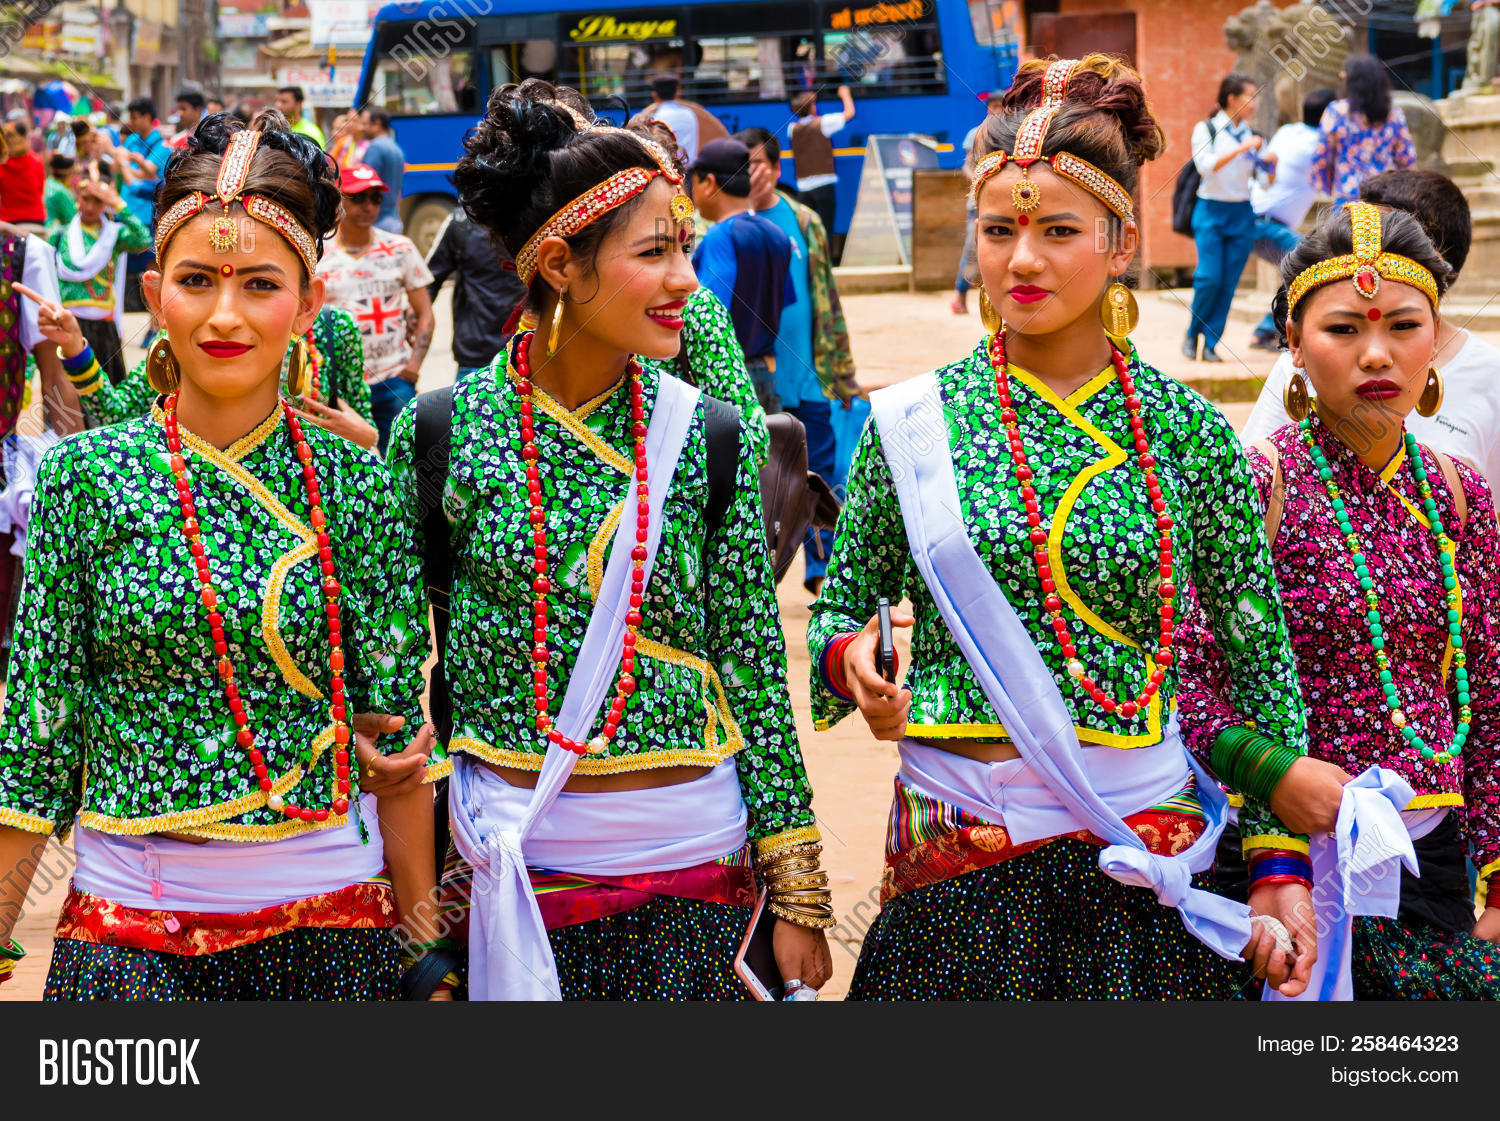 Dresses of Nepal - 7 Beautiful Traditional Nepalese Dresses